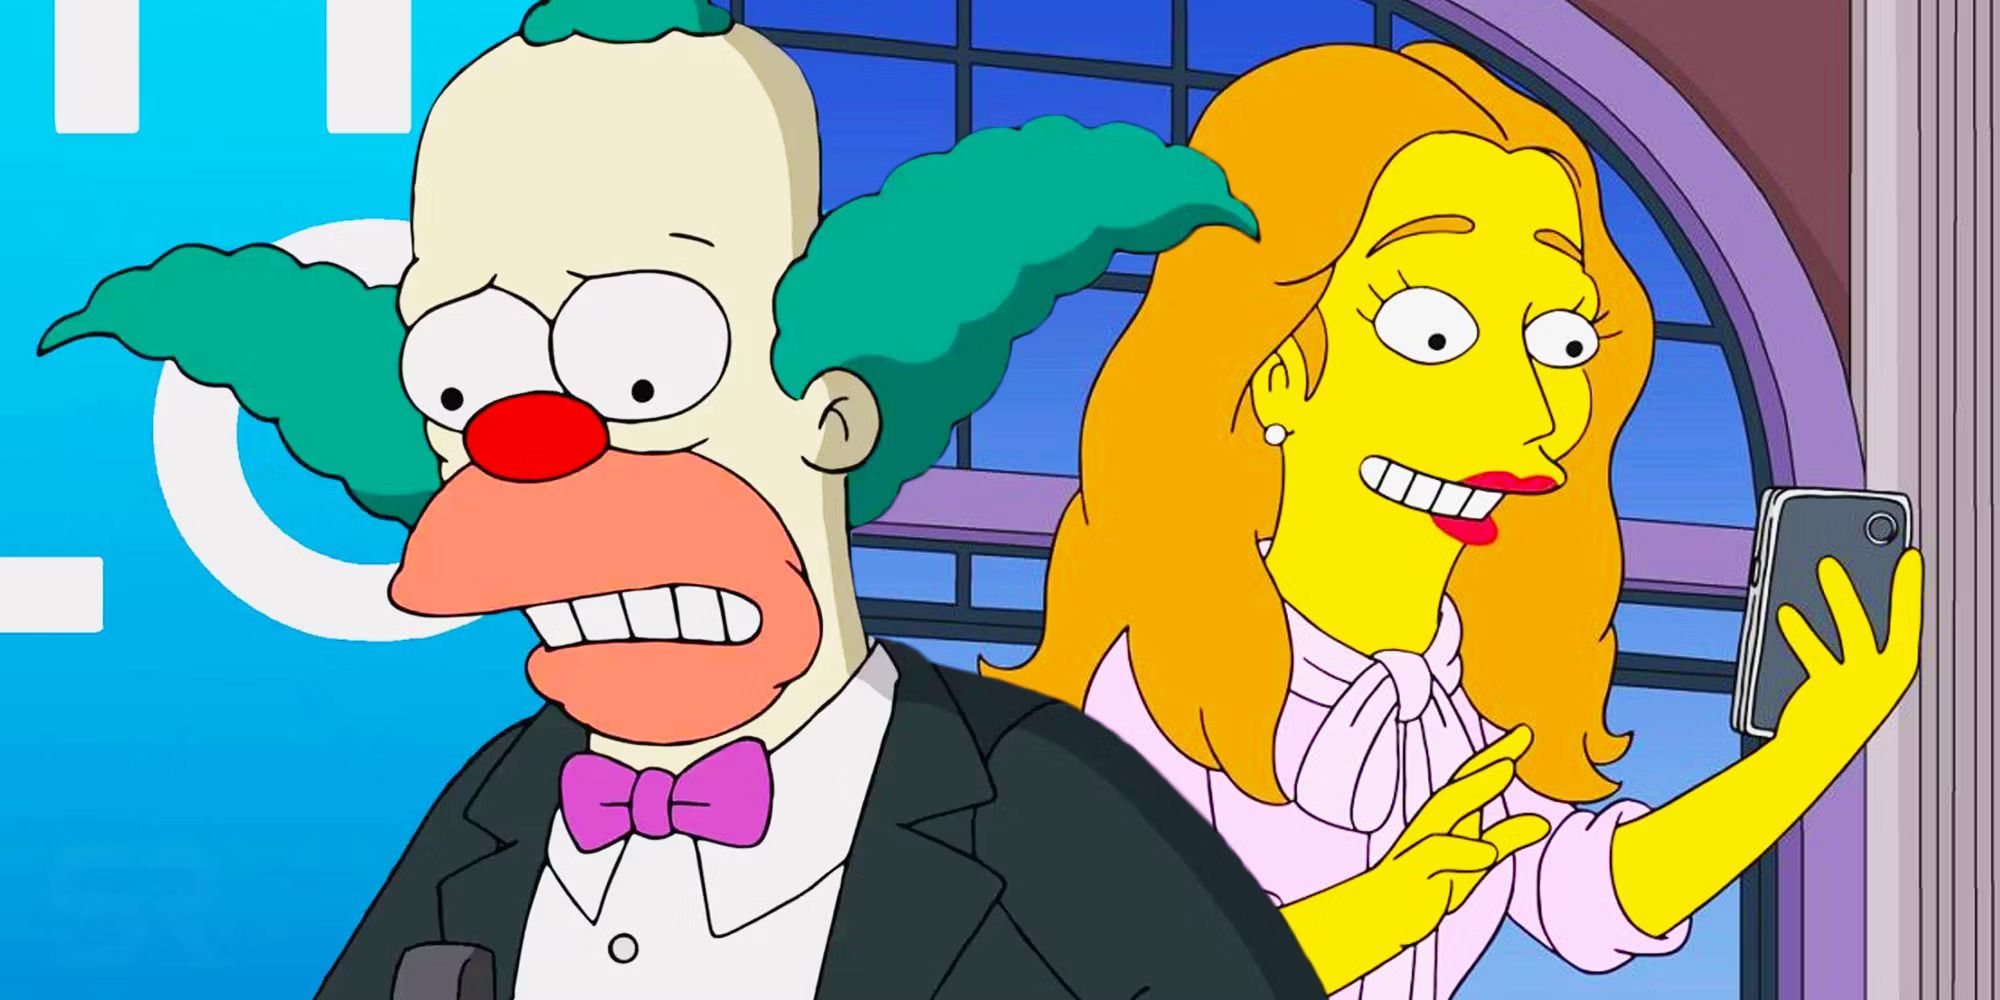 Krusty-the-clown-drew-barrymore-simpsons-cameo